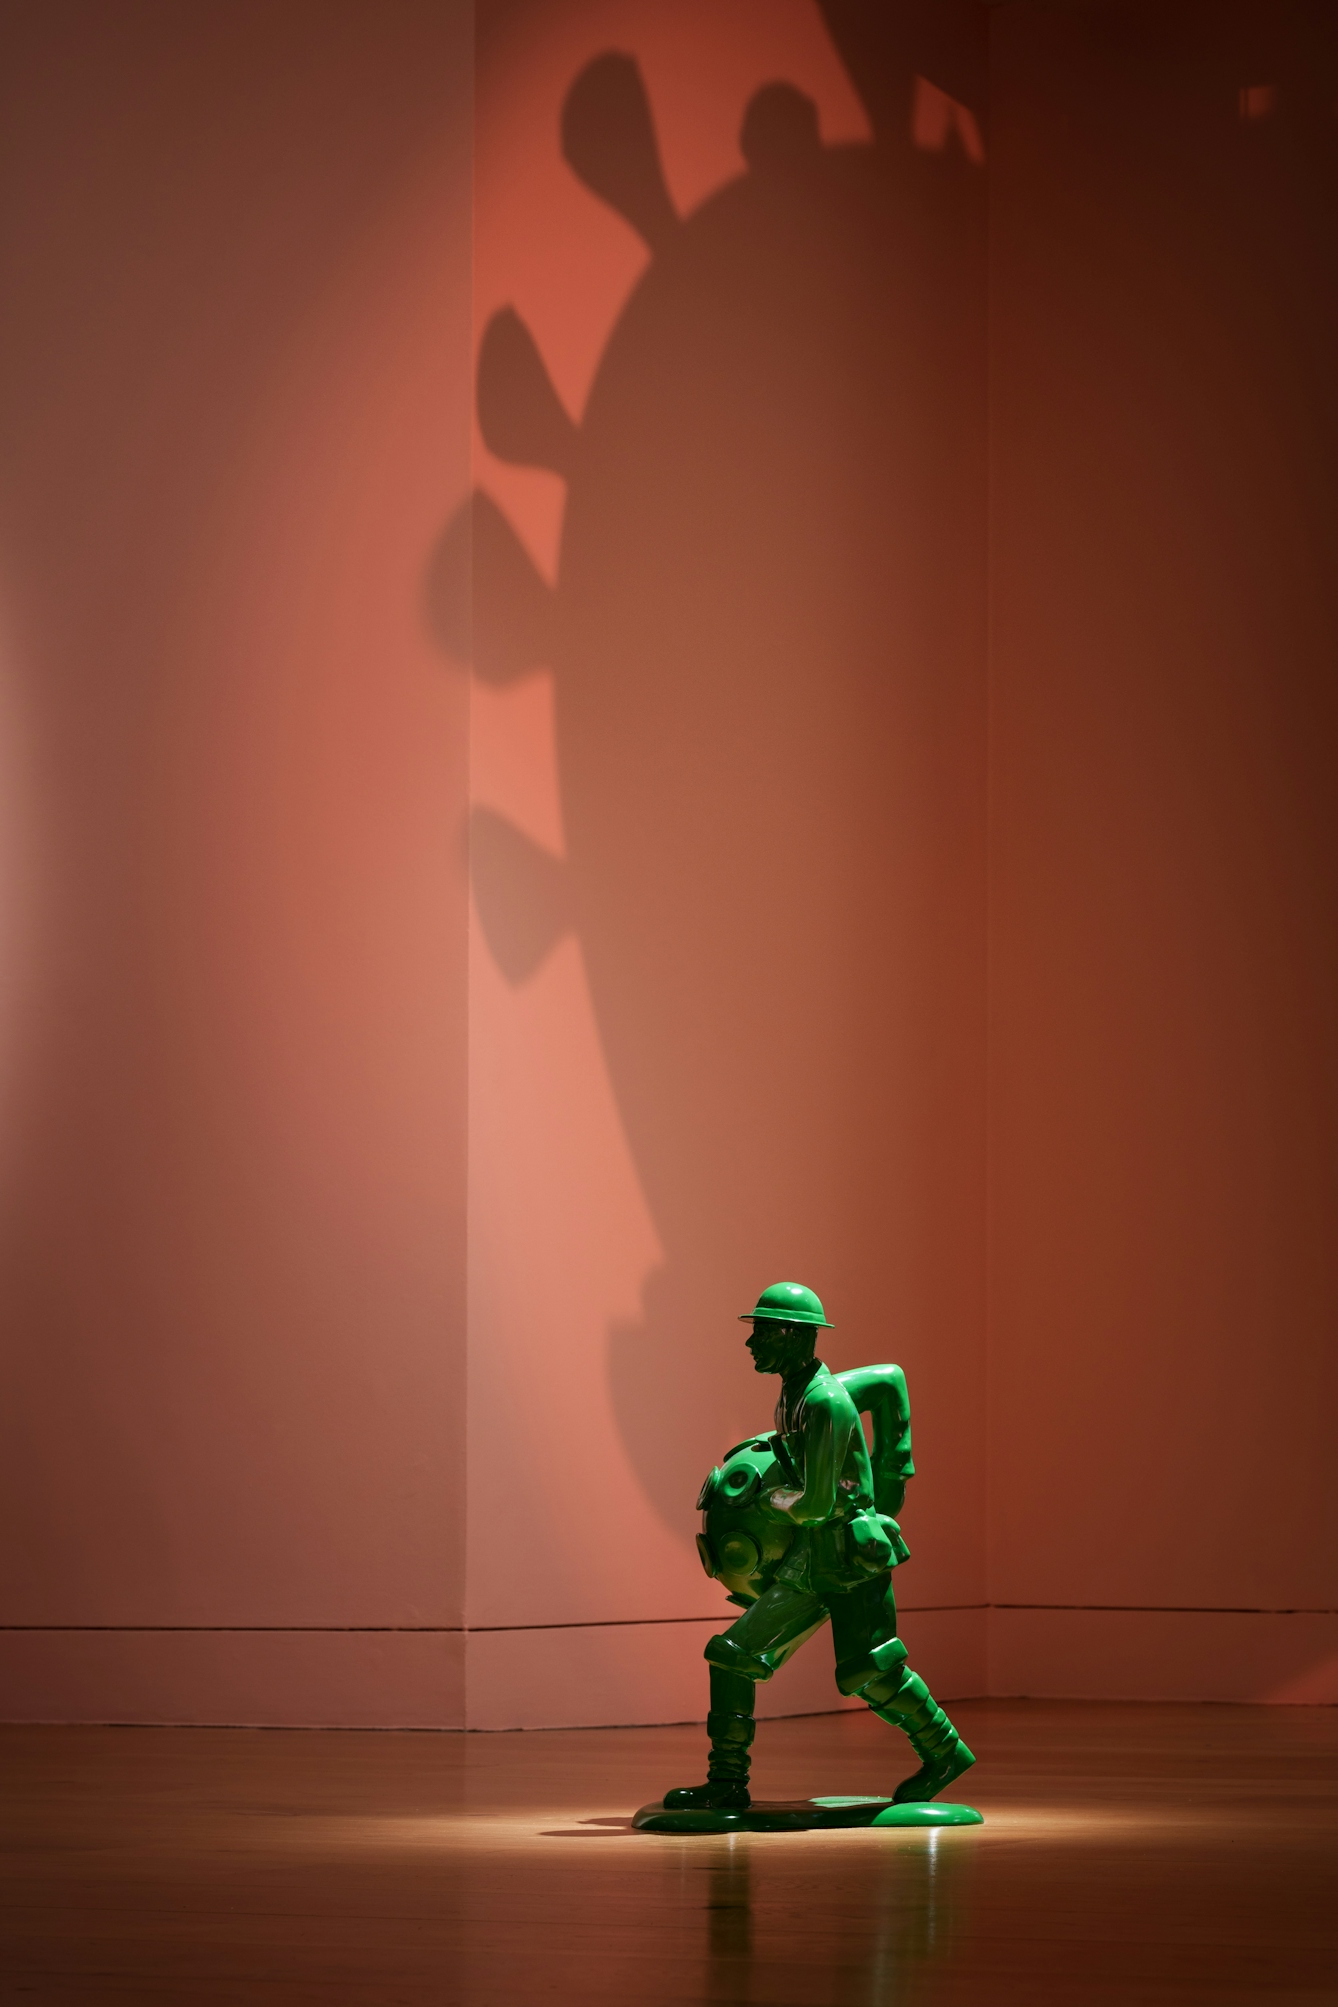 Photograph of an oversized green toy soldier sculpture wielding a molecular representation of a virus. Behind the soldier a large shadow of the virus is cast on the wall.